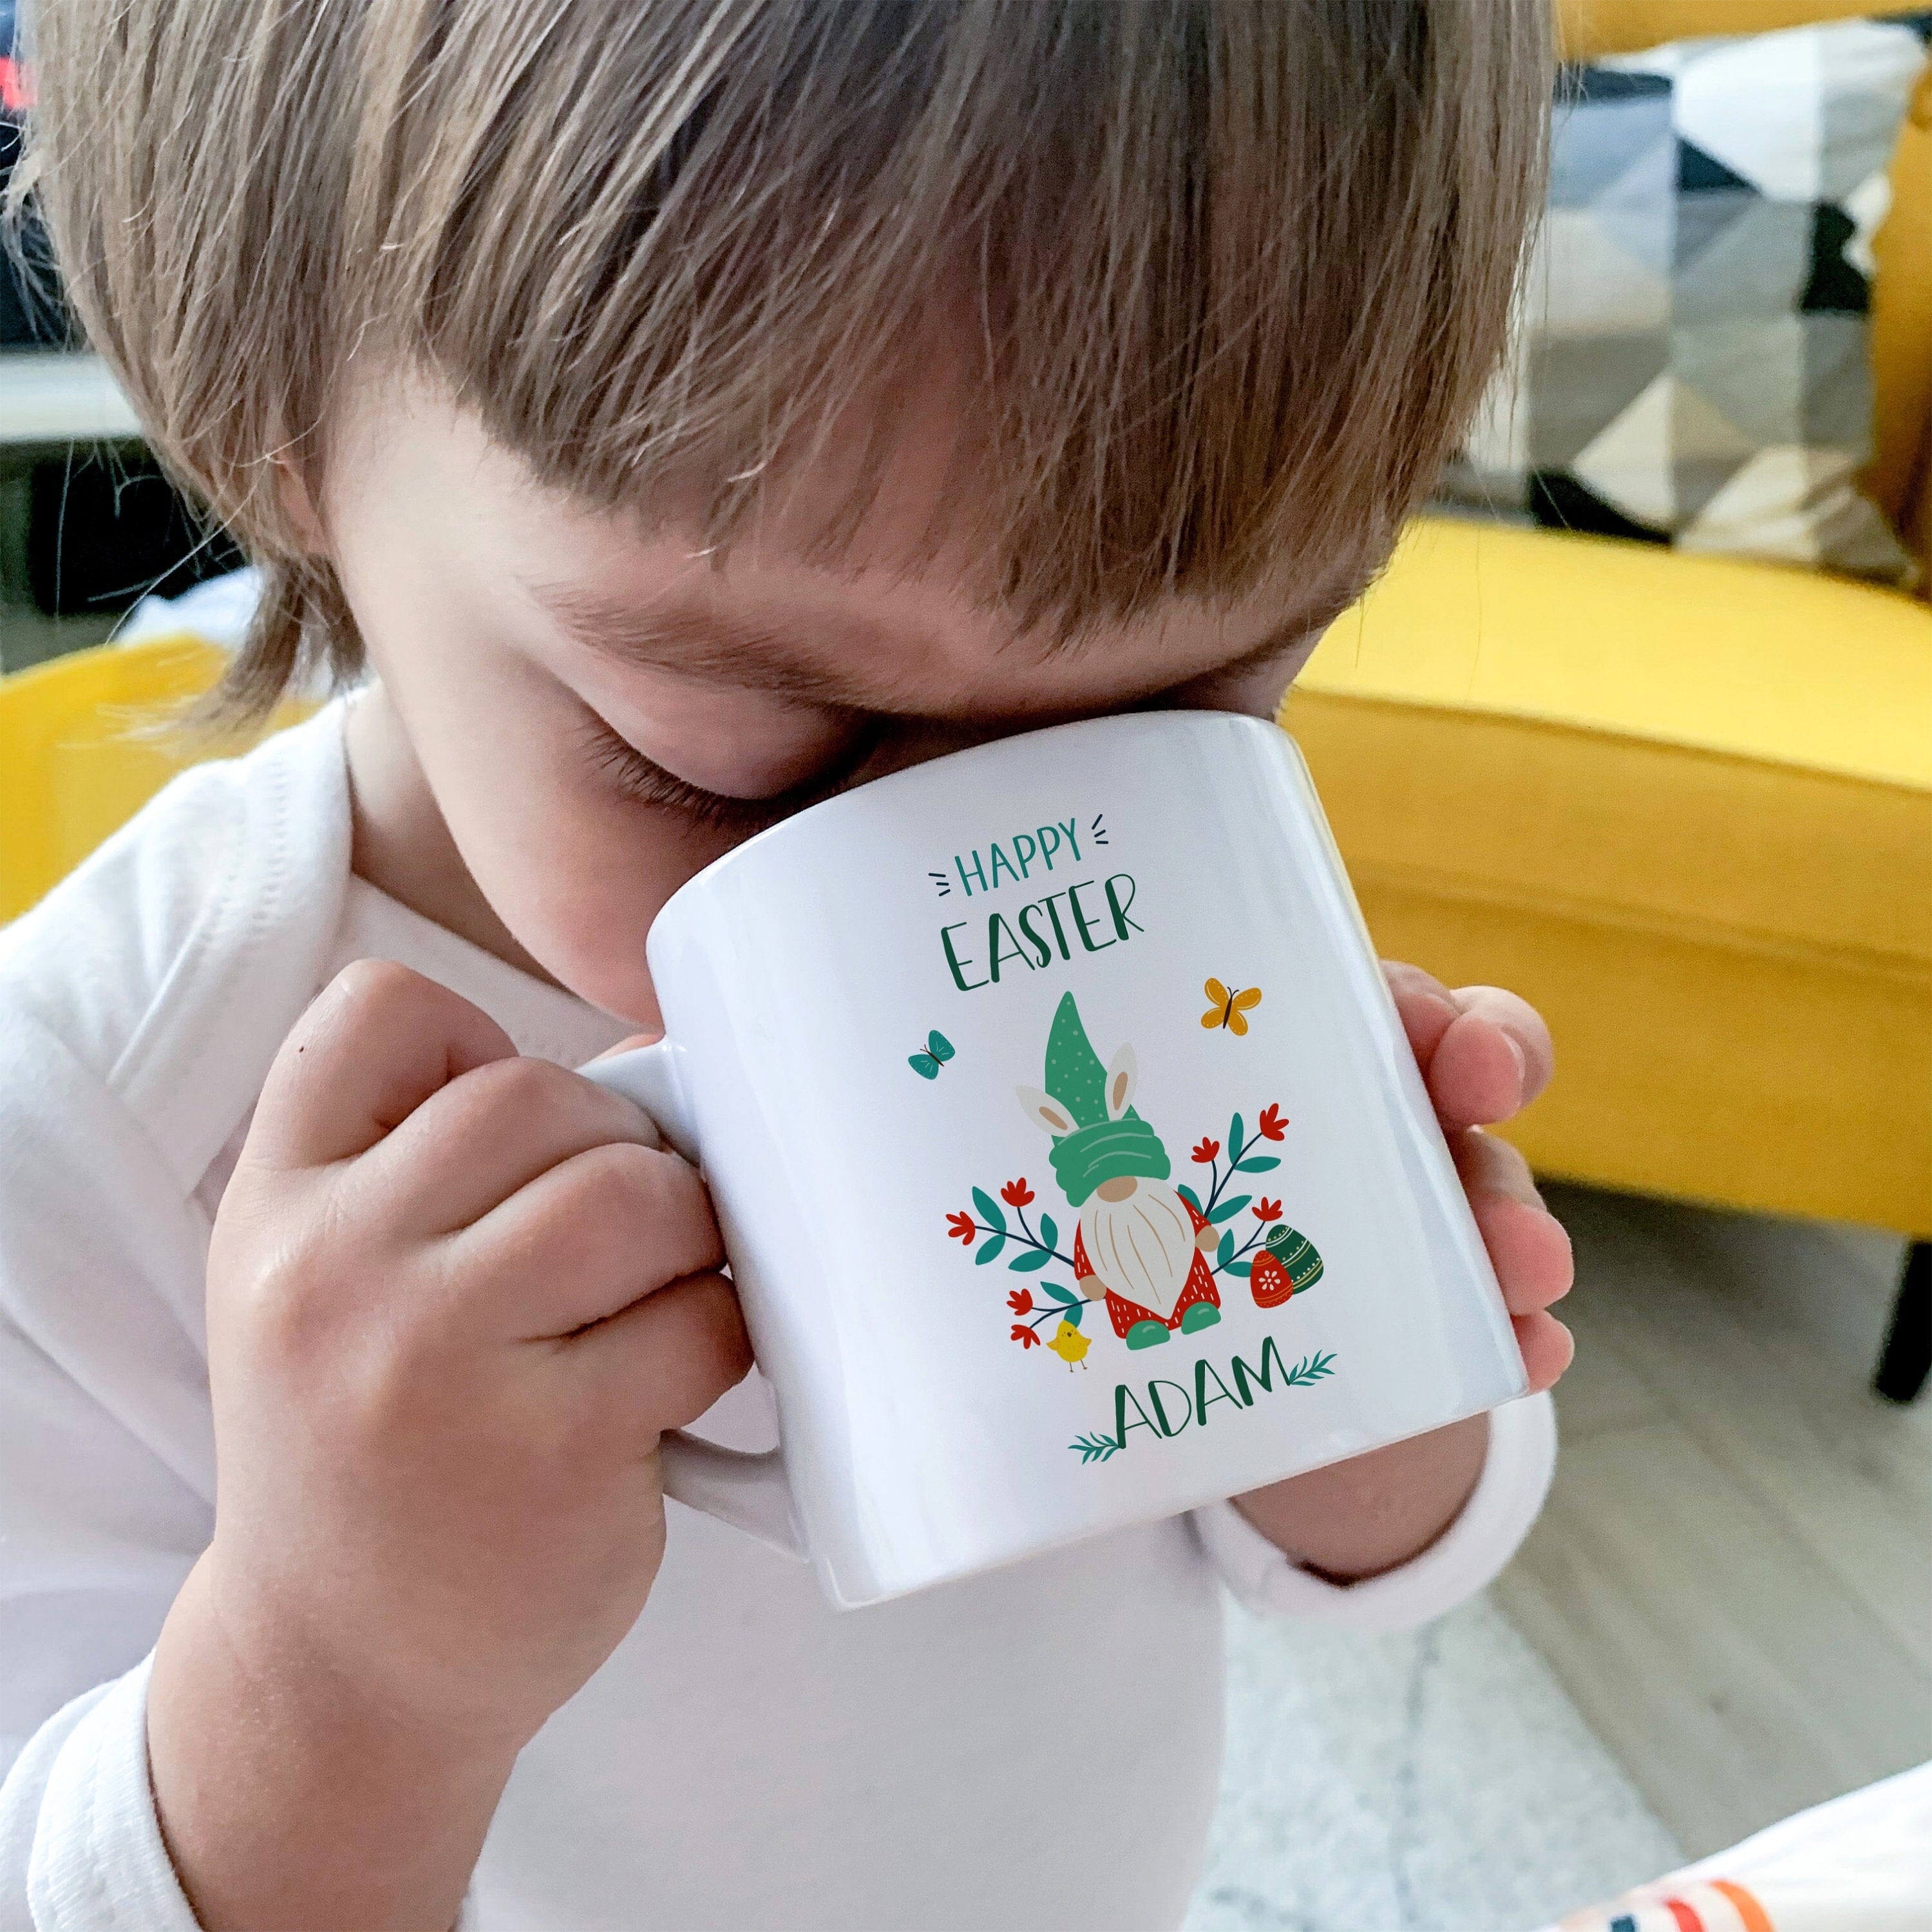 Personalised Kids Gnome Mug with name, 6oz Cute Floral First Easter Mug, Christmas Birthday Gift For Children's